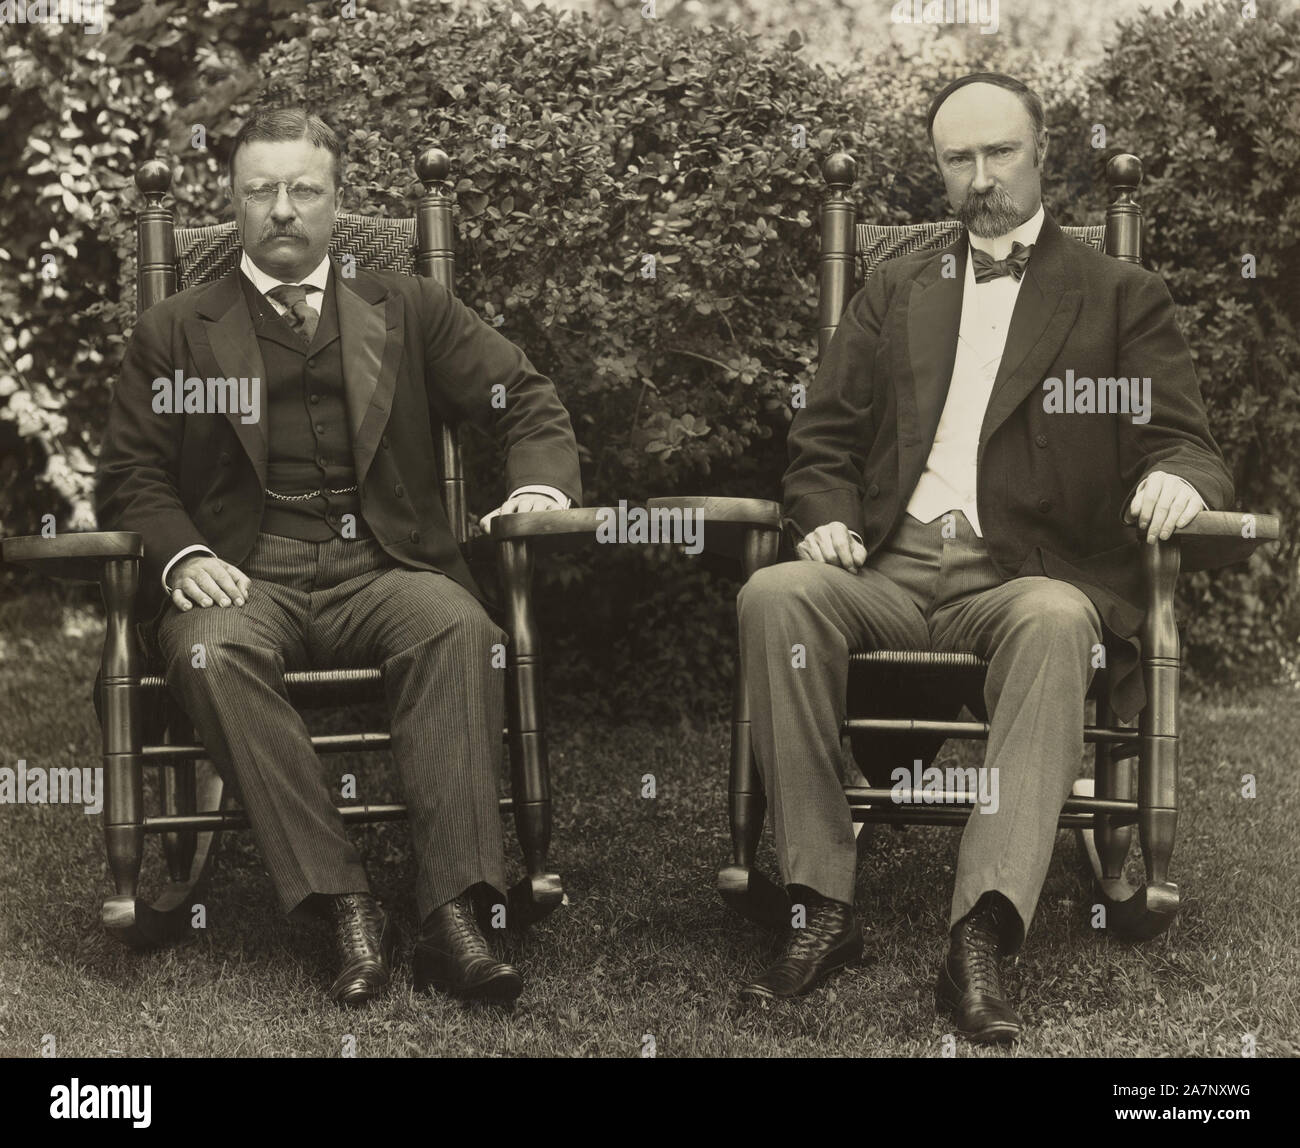 U.S. President Theodore Roosevelt and Vice President Charles Fairbanks, seated in rocking chairs, facing front, on lawn at Sagamore Hill, Cove Neck, New York, USA, Pach Brothers, 1904 Stock Photo